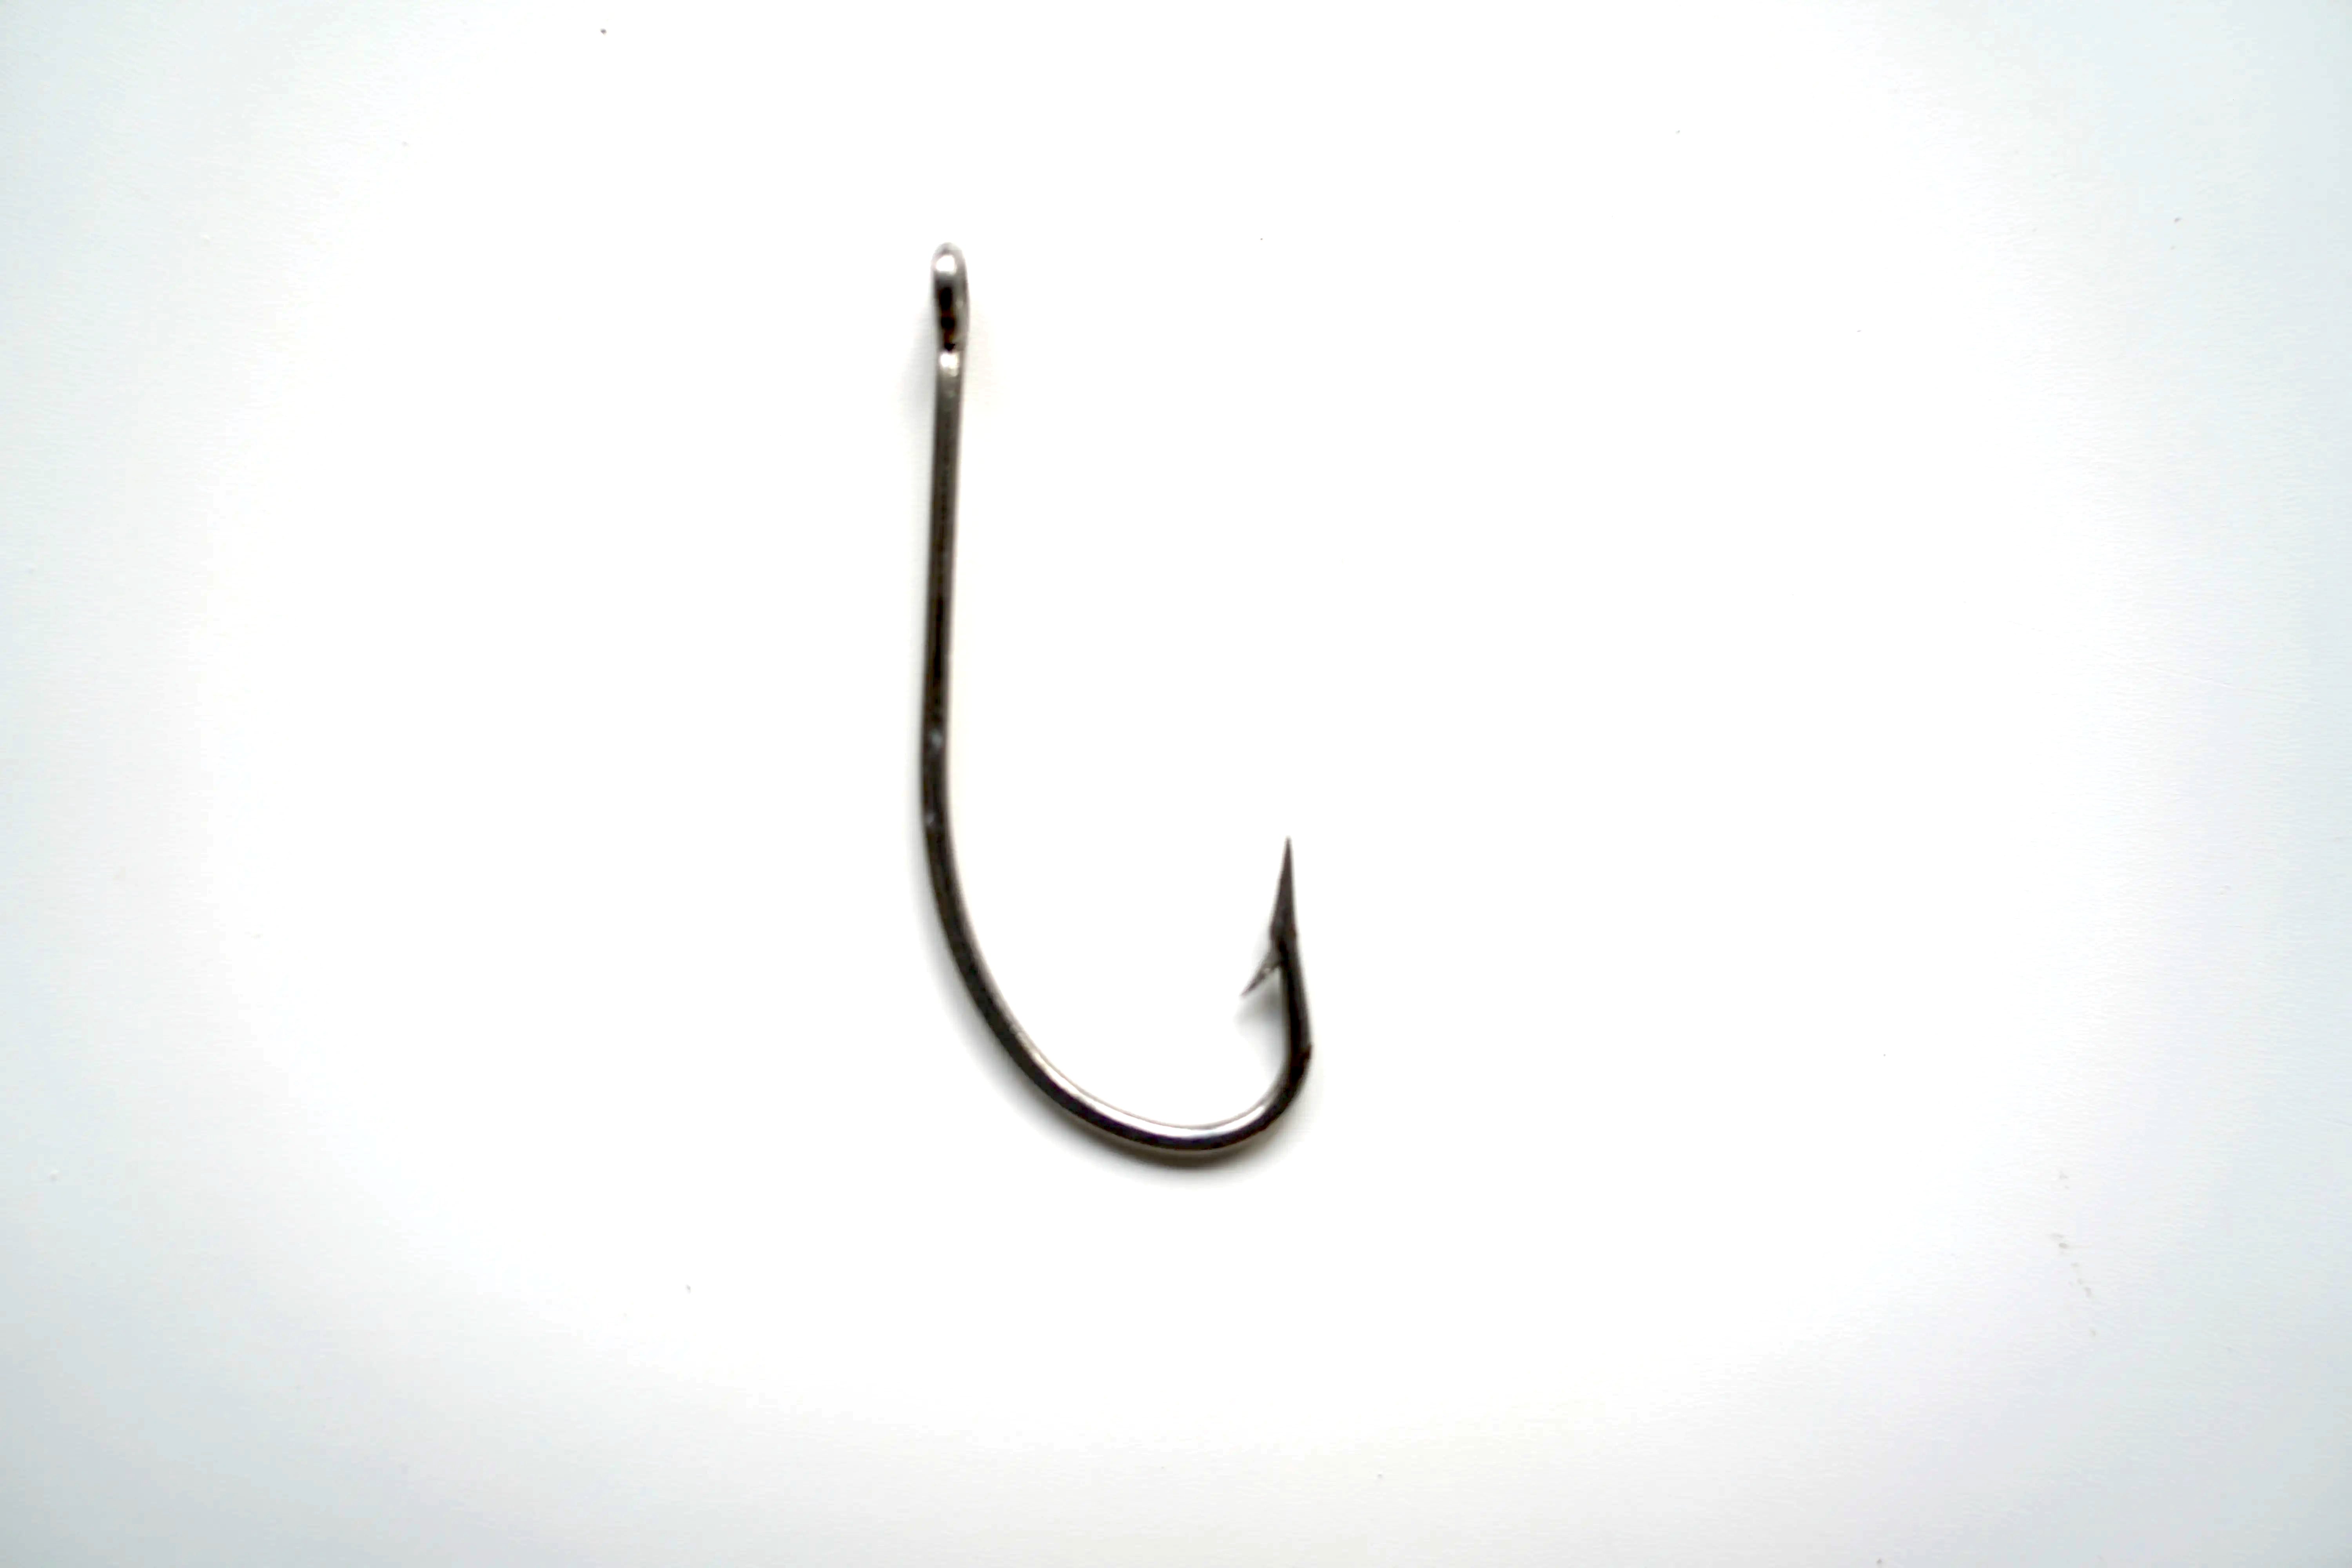 Bass Octopus/Circle Hook Fishing Hooks for sale